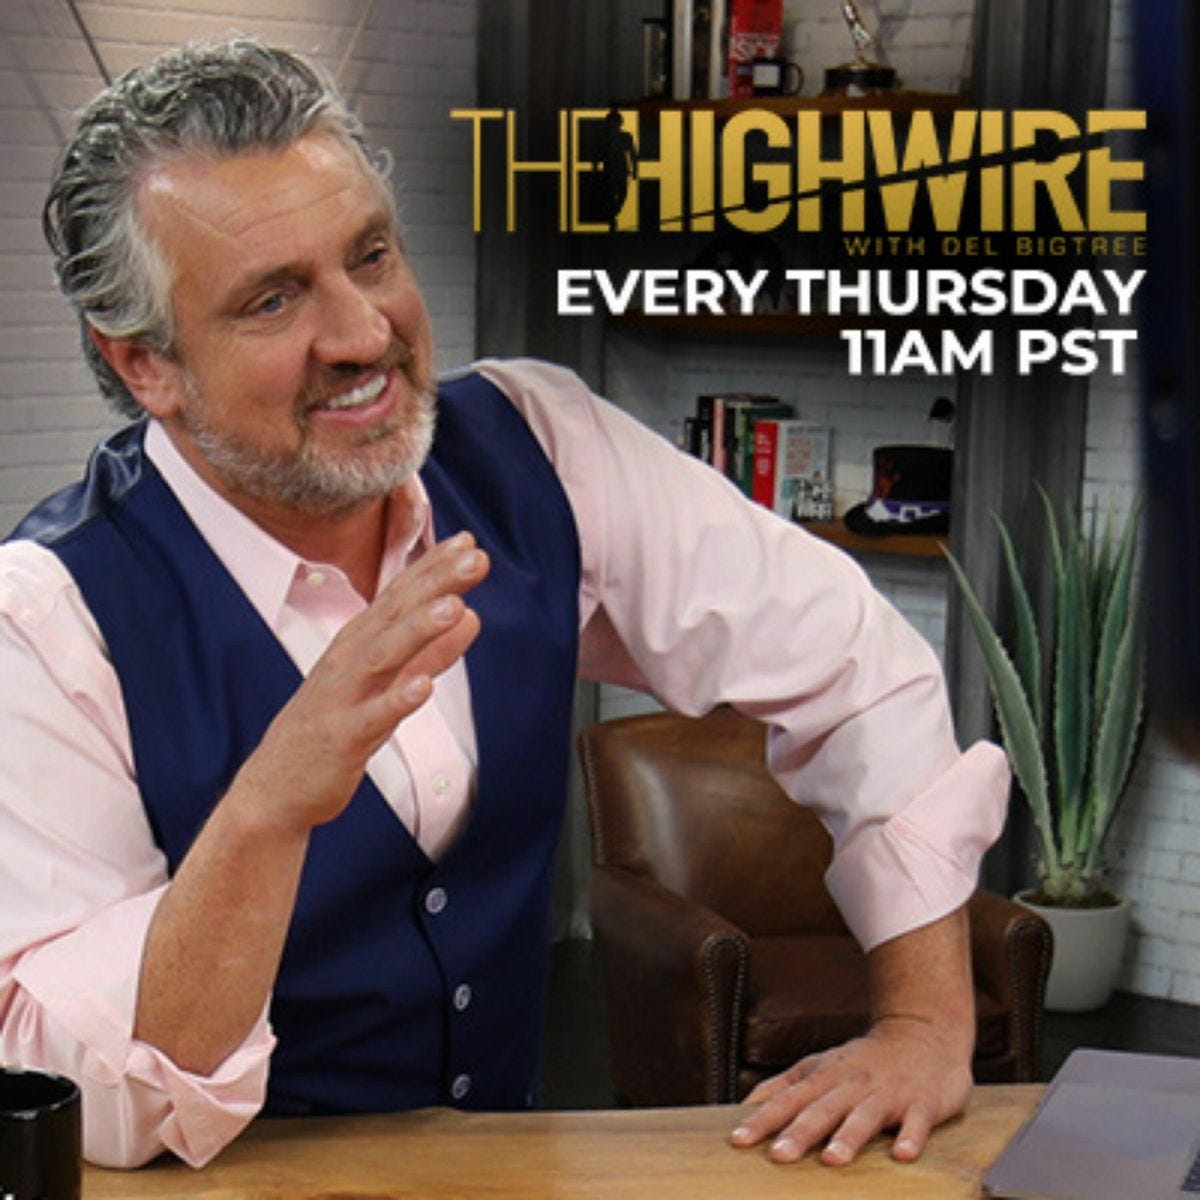 Listen Free to The Highwire with Del Bigtree on iHeartRadio Podcasts | iHeartRadio